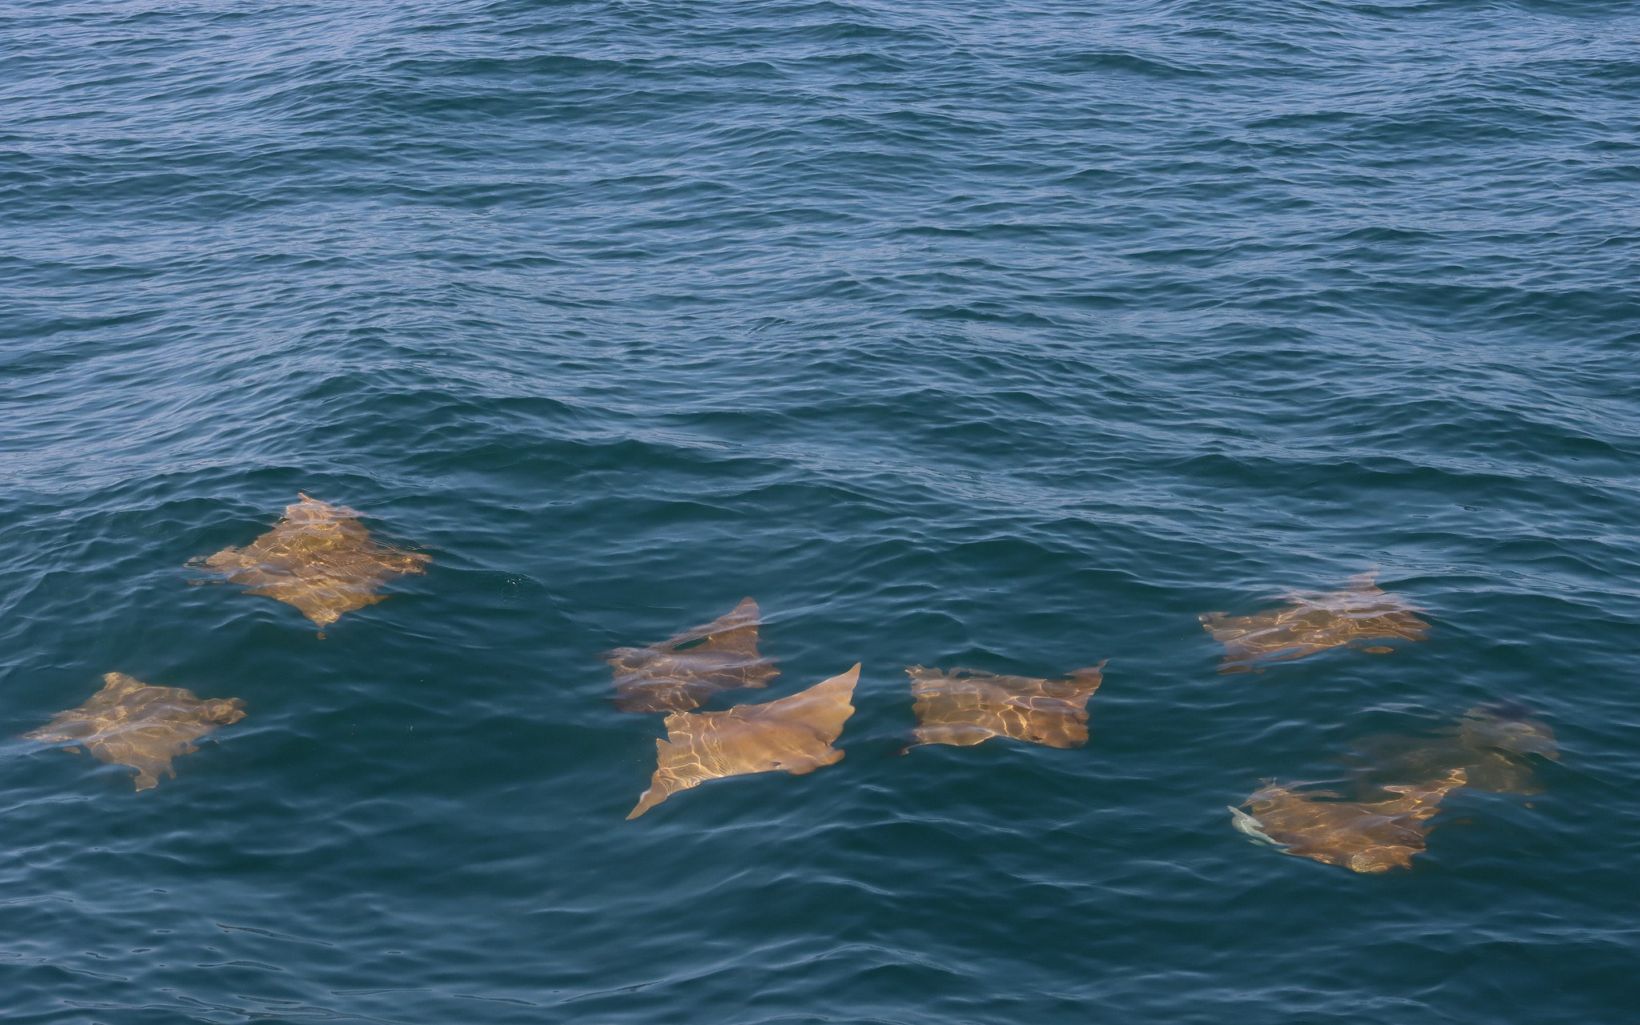 Cownose Rays Although rays aren't sharks, they play a role in sharks' diets.  Cownose rays give birth to their young in bays and estuaries, and may end up as a shark's meal! © Cape May Whale Watch and Research Center